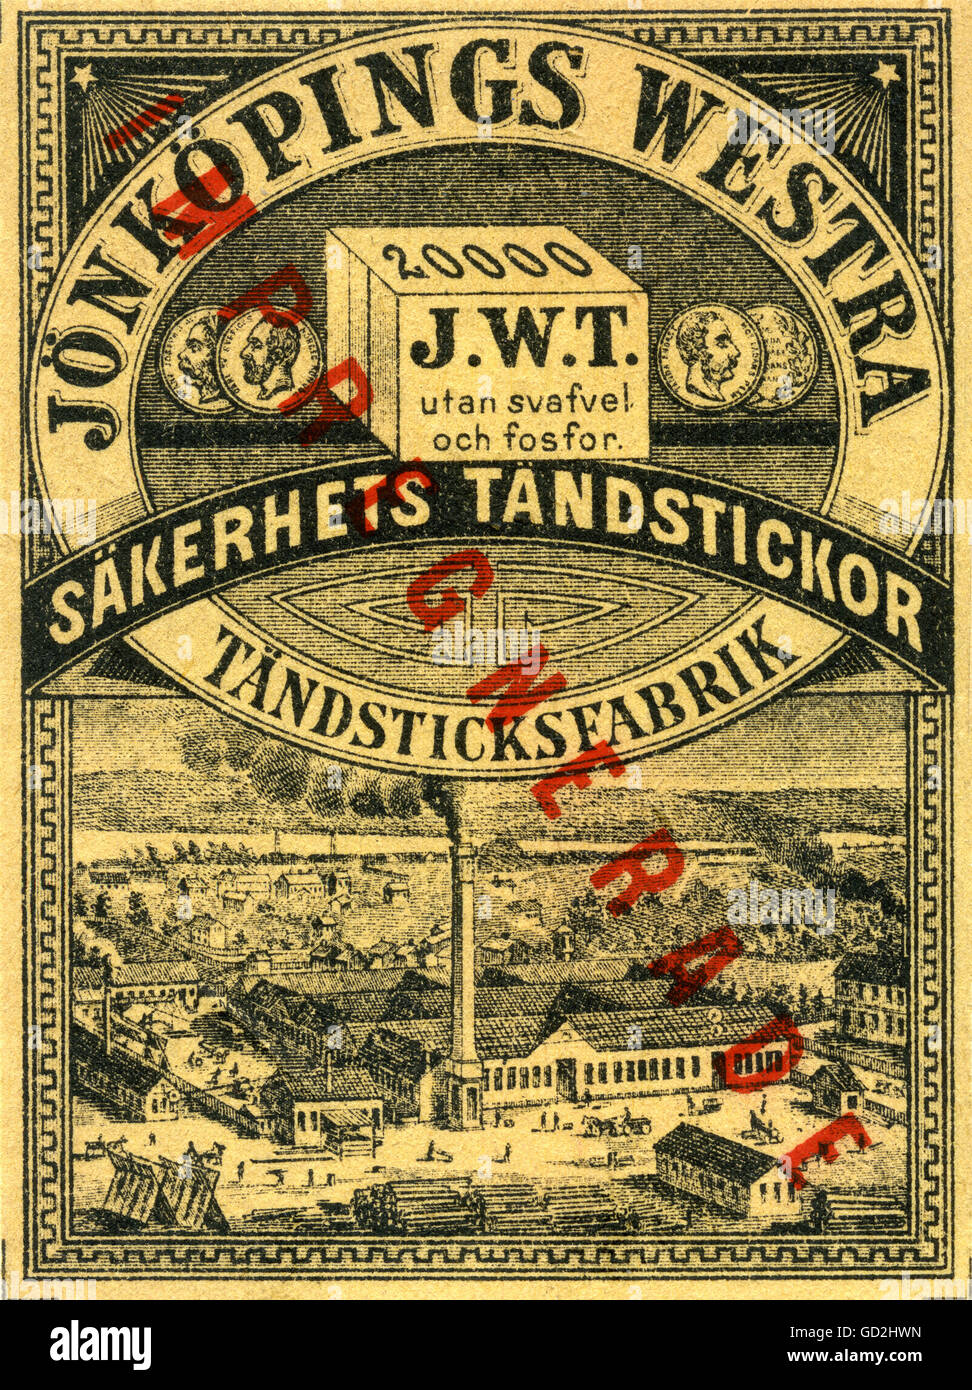 industry,Joenkoepings Westra Tandsticks Company,J.W.T.,match factory,established: 1881,image at the label of a matchbox,red overprint: impregnate,inscription: without sulphur and phosphorus,Joenkoeping,Sweden,circa 1895,invention,inventions,decorative,matchbox label,safety matches,match,matchstick,matches,matchsticks,companies,company,economy,Swedish,illustration,litho,lithograph,19th century,industry,industries,figure,figures,label,labels,matchbox,match-box,matchboxes,impregnate,impregnating,sulphur,sulfur,historic,his,Additional-Rights-Clearences-Not Available Stock Photo